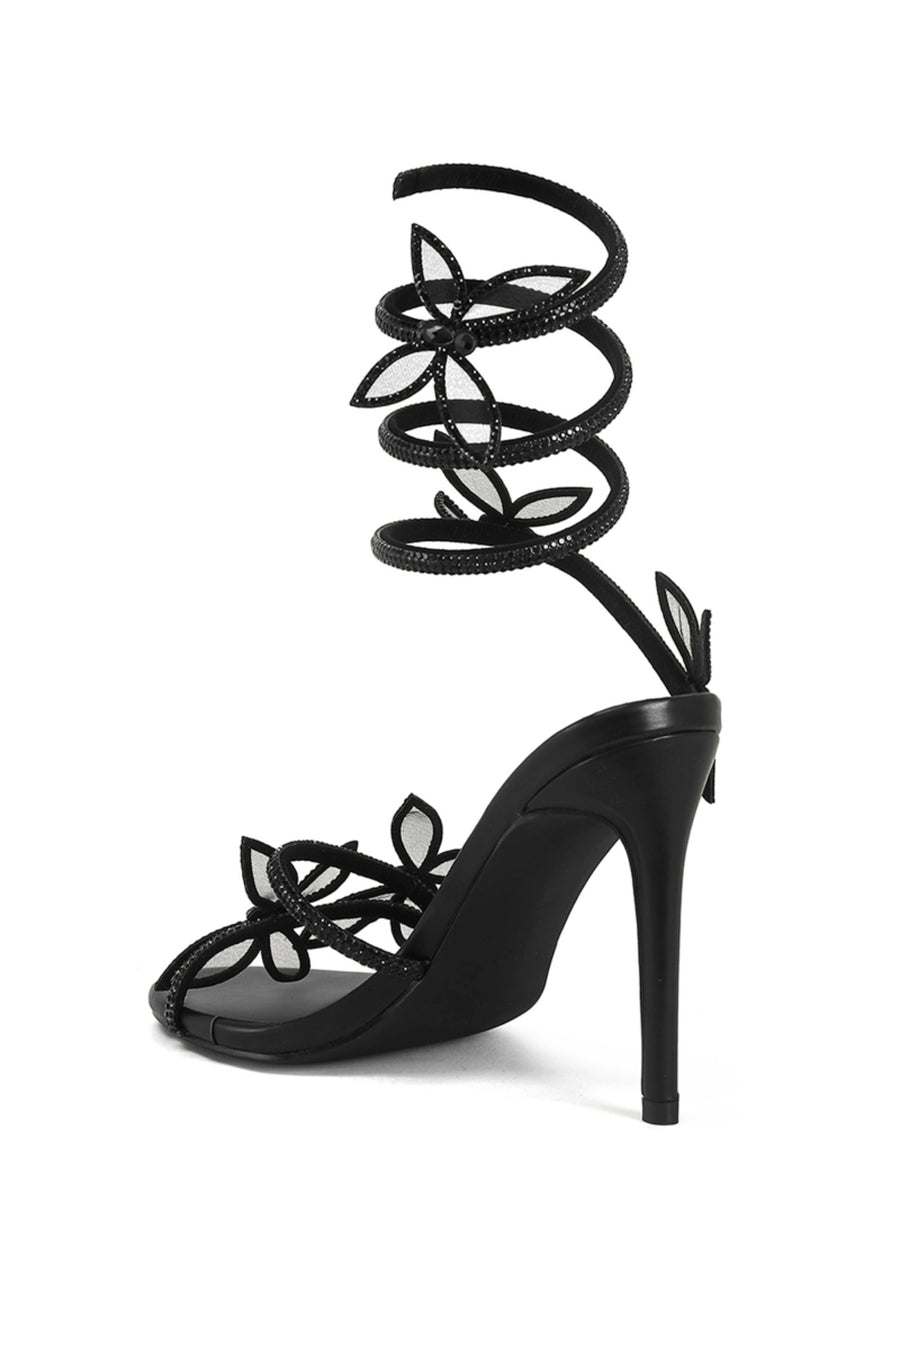 black open toe stiletto heels with black crystal embellished wrap up cords completed with butterfly accents